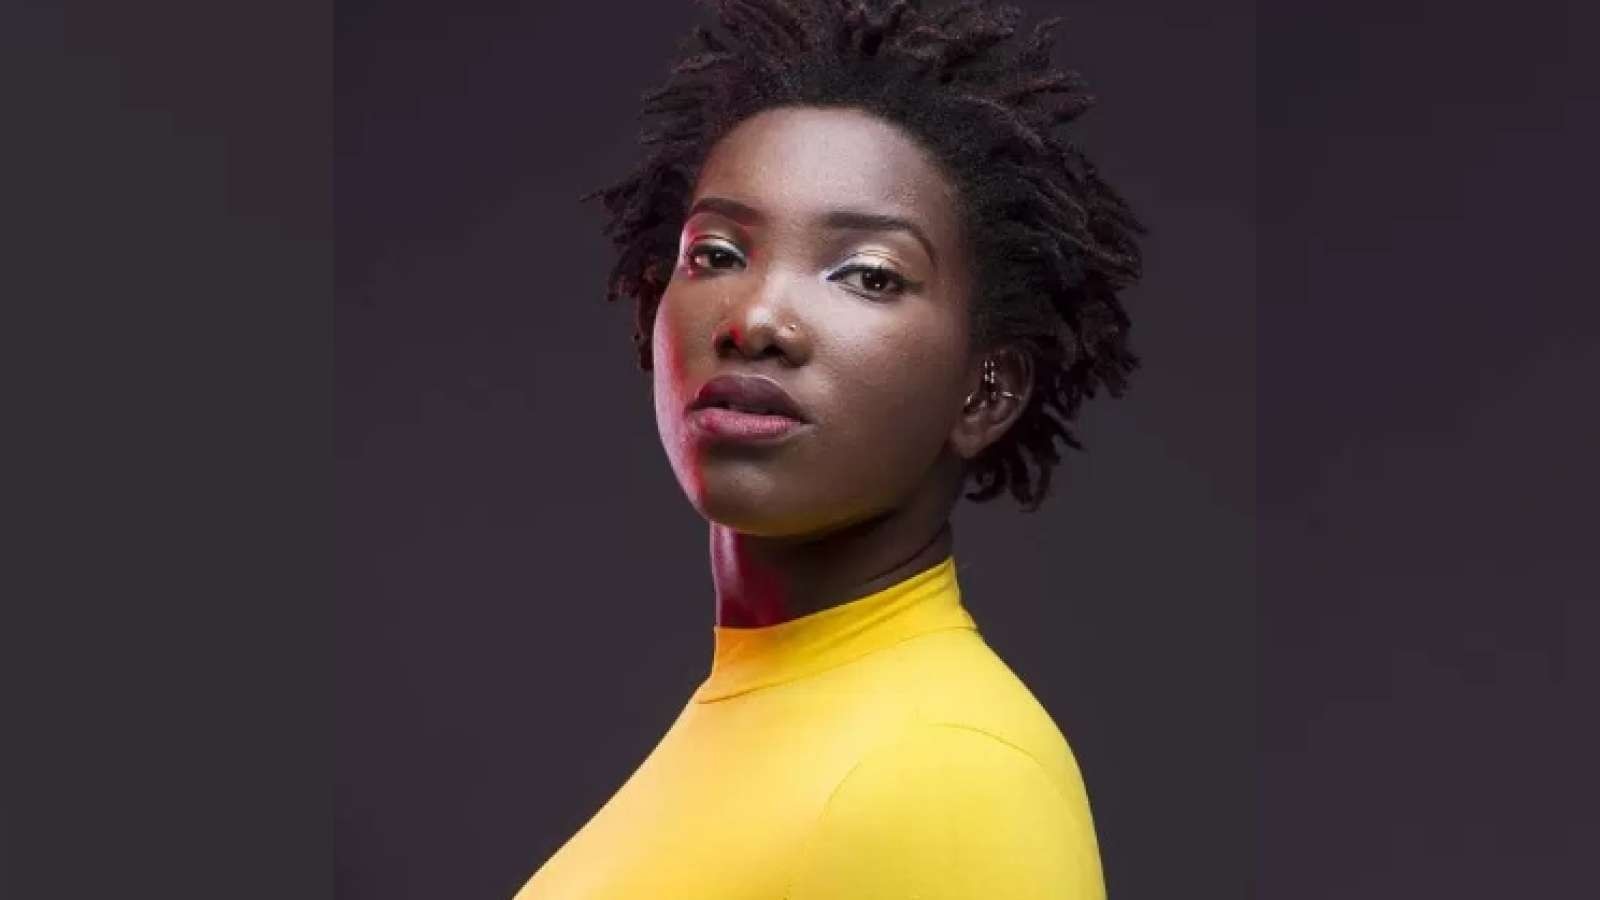 artist popularly known as Ebony Passed away on Wednesday 7th February, 2018...